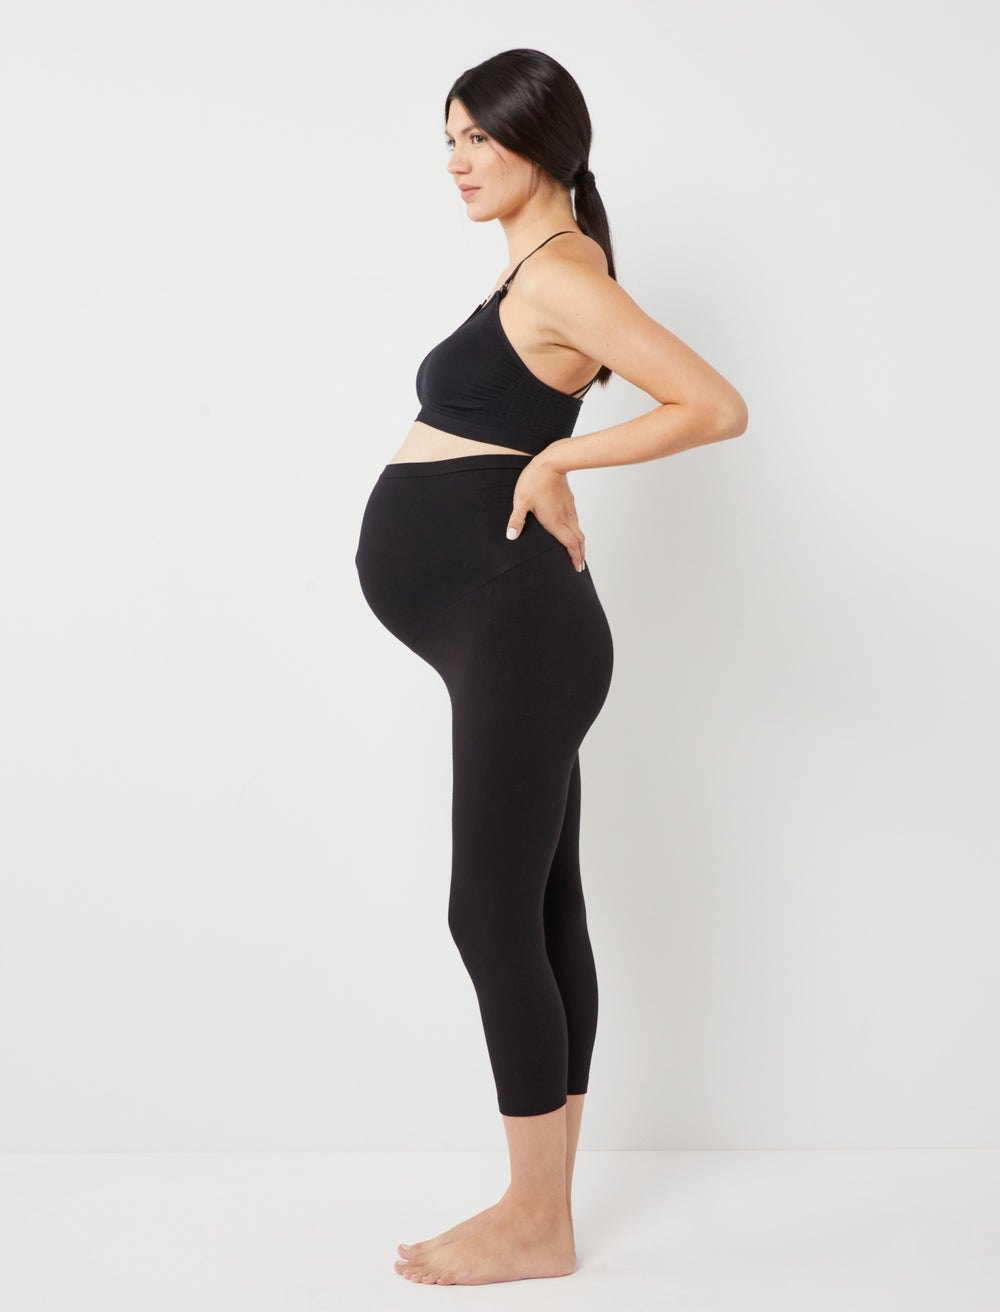 Joyaria Maternity Leggings Over The Belly Ultra Soft Stretchy Full Length  Active Workout Yoga Pregnancy Pants Petite (Black, Small) at  Women's  Clothing store